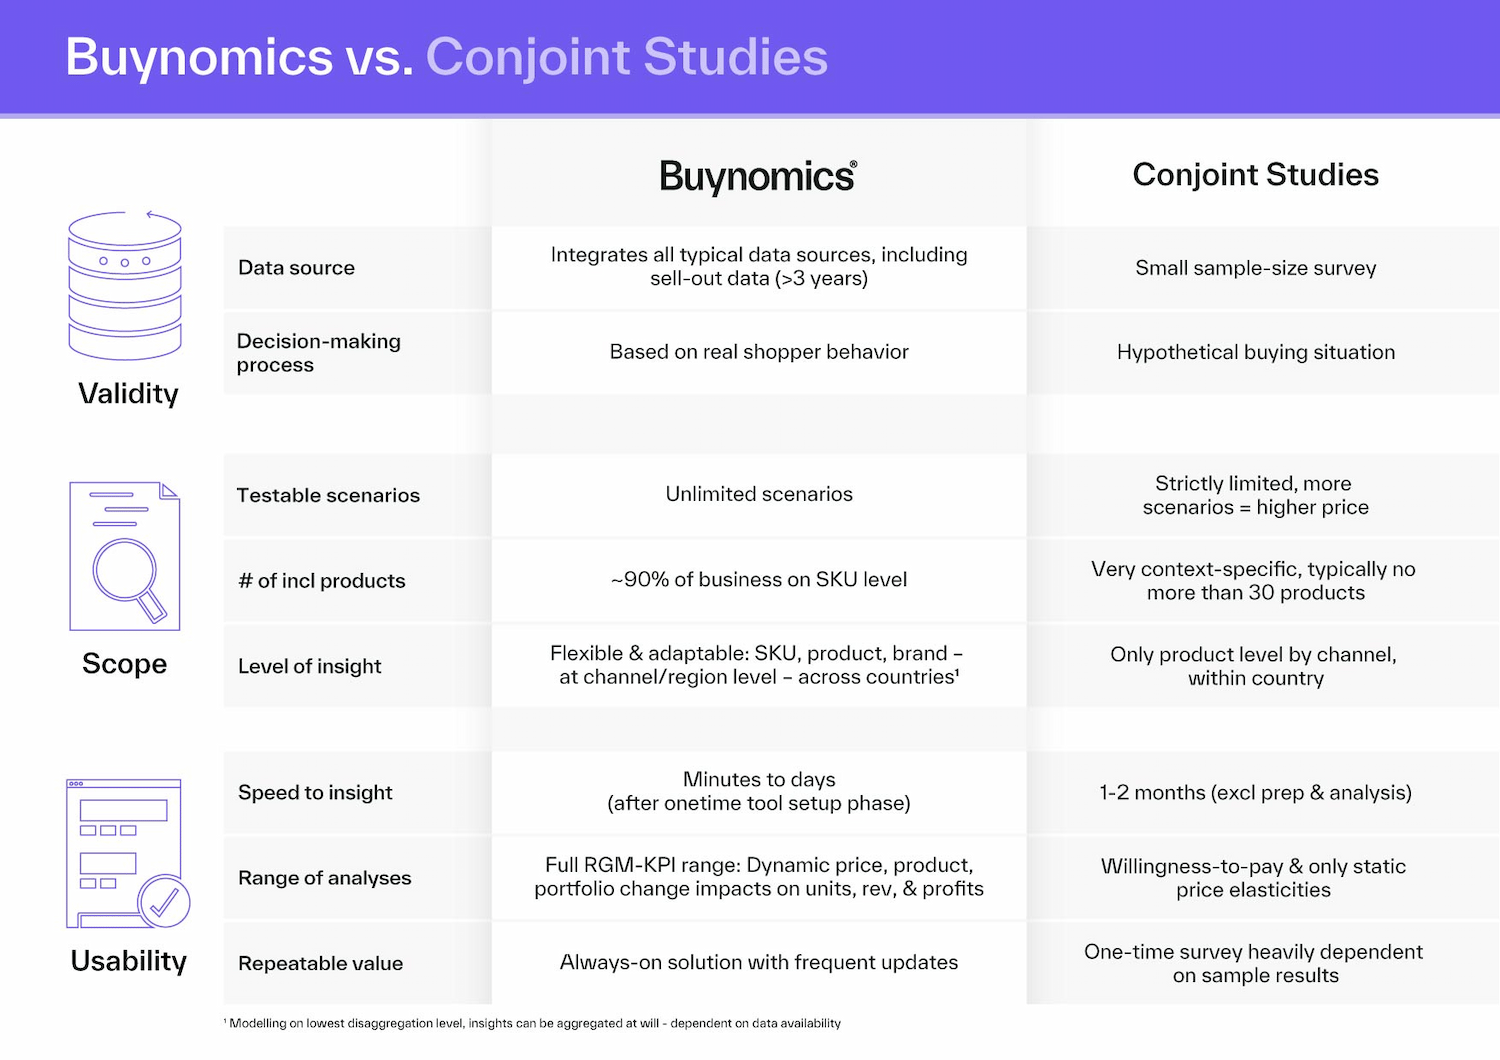 Buynomics compared to conjoint studies in terms of validity, scope, and usability